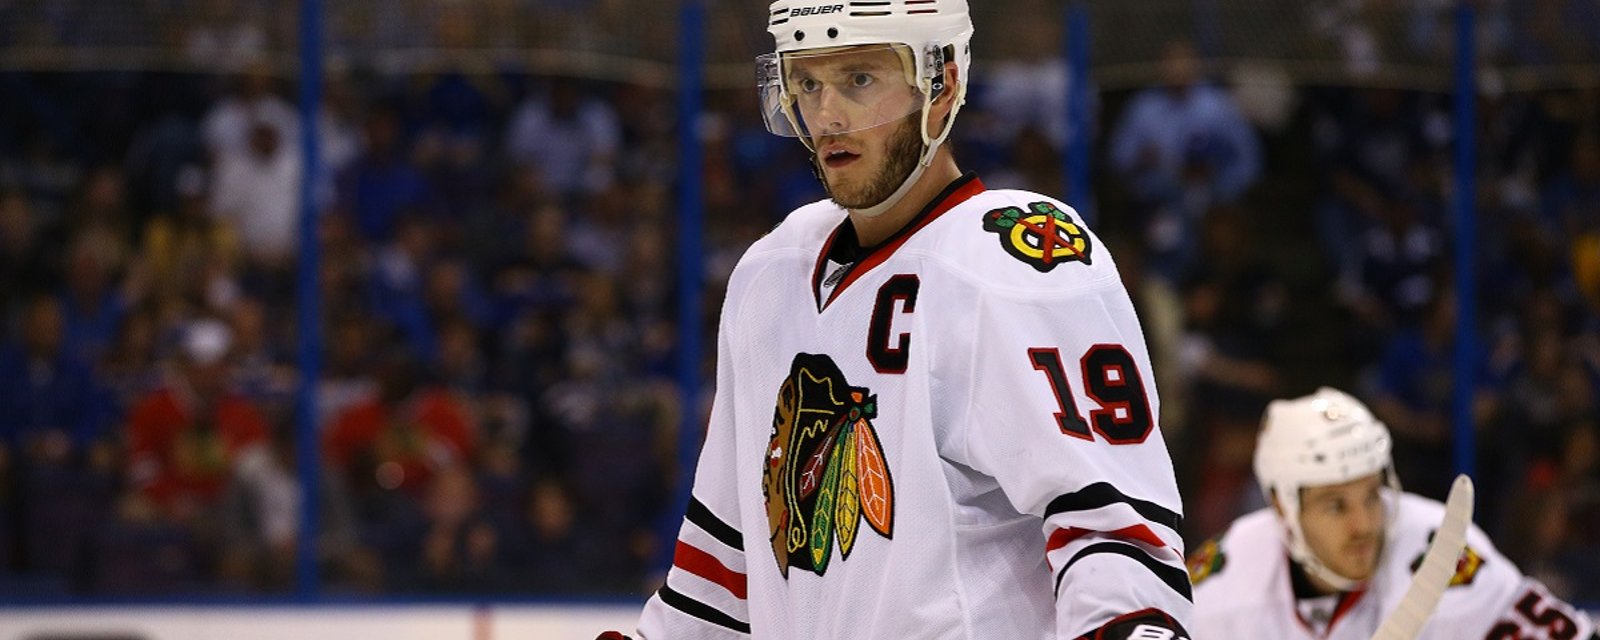 Toews wants to produce more offense, but he may not have the tools to do it.